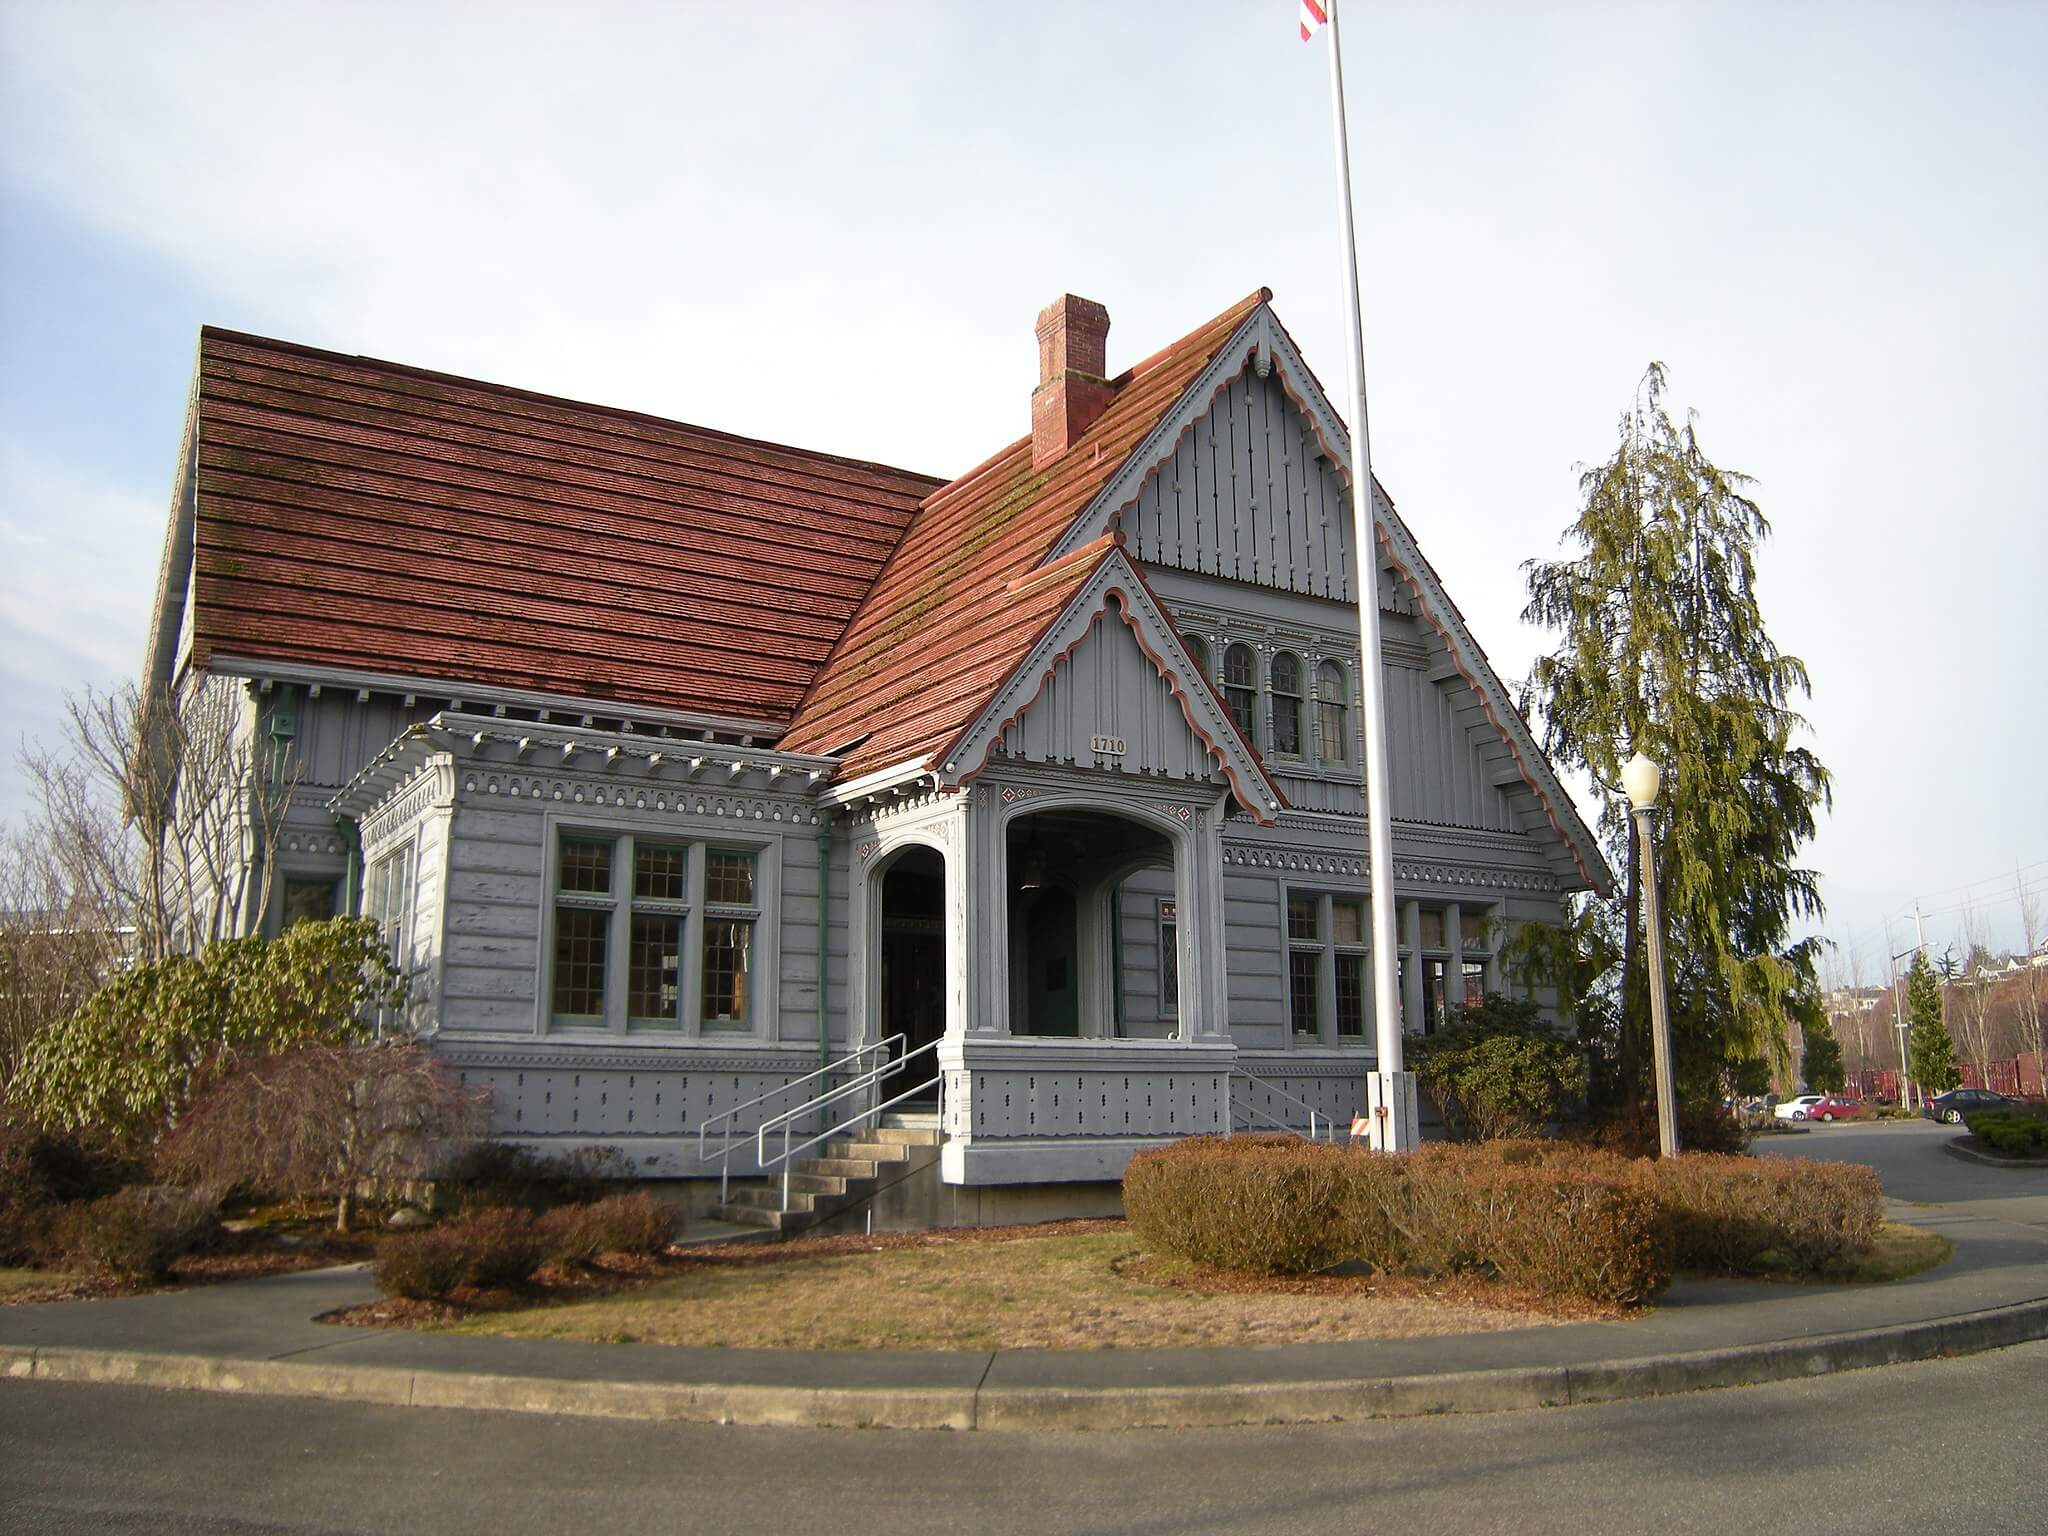 a historic building in washington state